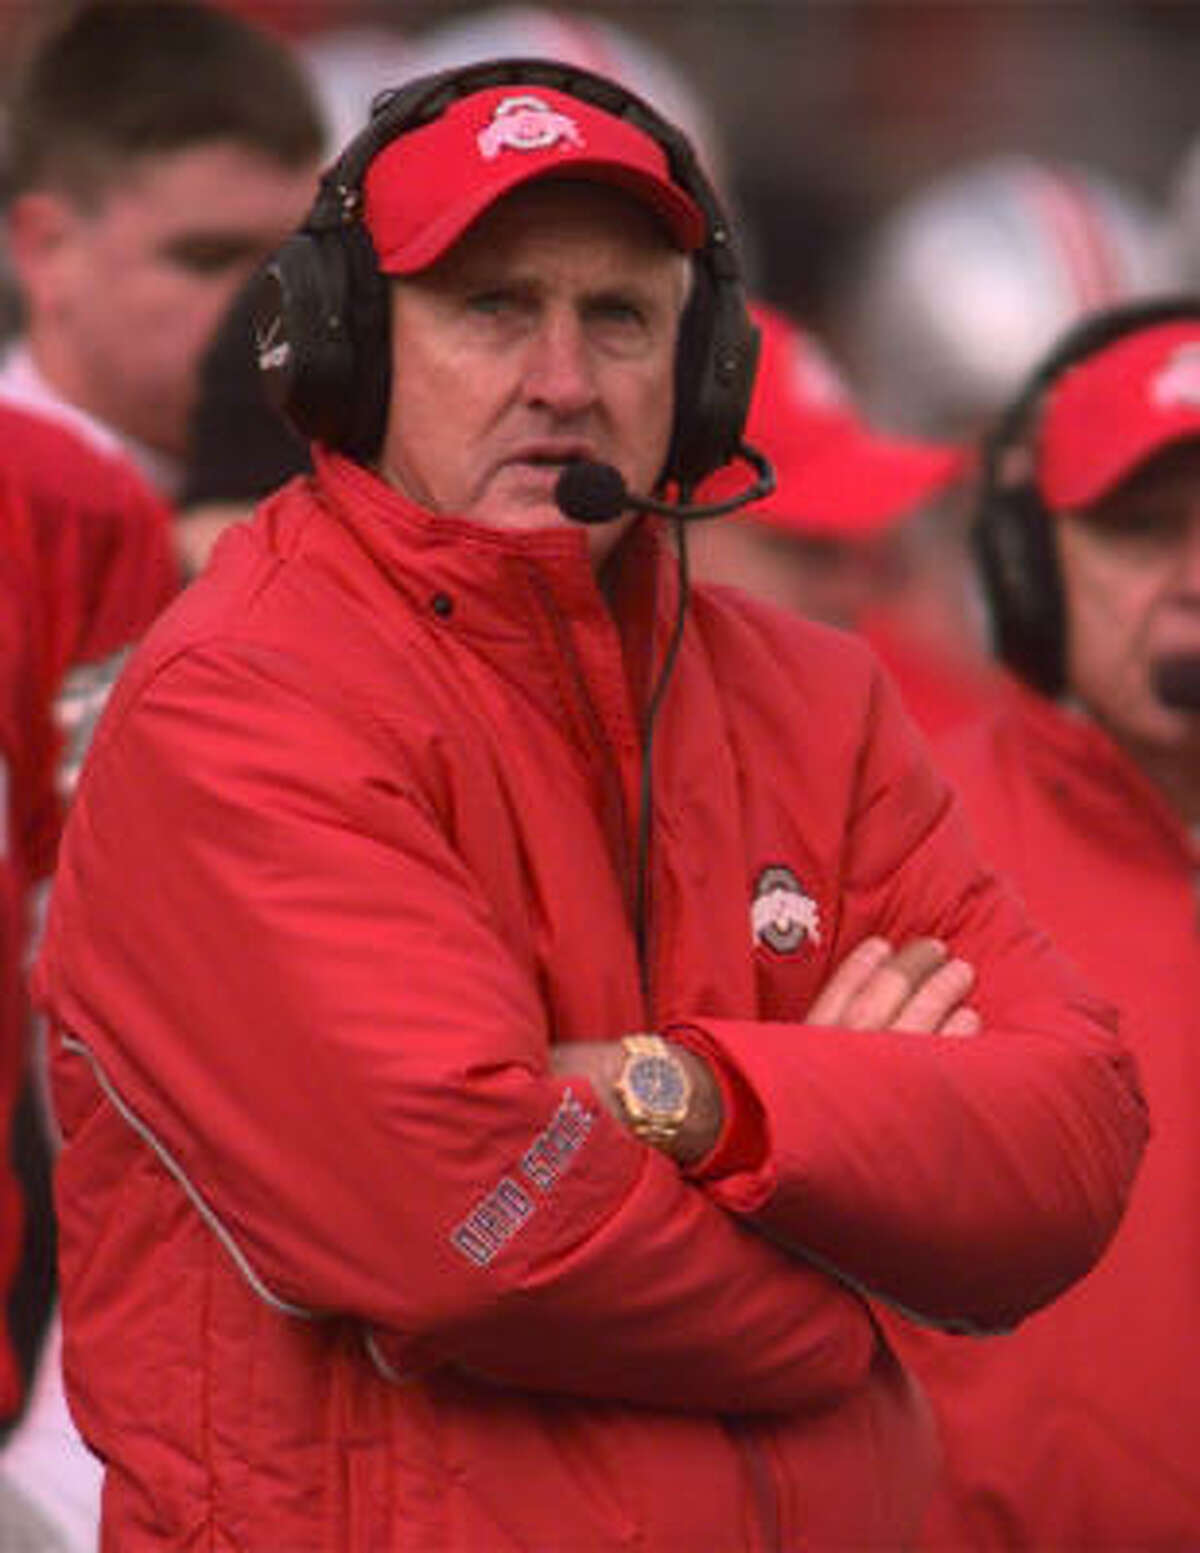 FILE--Ohio State Head Coach John Cooper is shown during the final minutes of Michigan's 38-26 win over Ohio State, Nov. 18, 2000 in Columbus, Ohio. Cooper is out after 13 years as coach of Ohio State, a TV station reported Tuesday, Jan. 2, 2001 following yet another bowl loss by the Buckeyes. WBNS, which airs Cooper's highlight show, quoted multiple unidentified sources within the university as saying that he and Ohio State have agreed to terminate his $1.1 million contract.